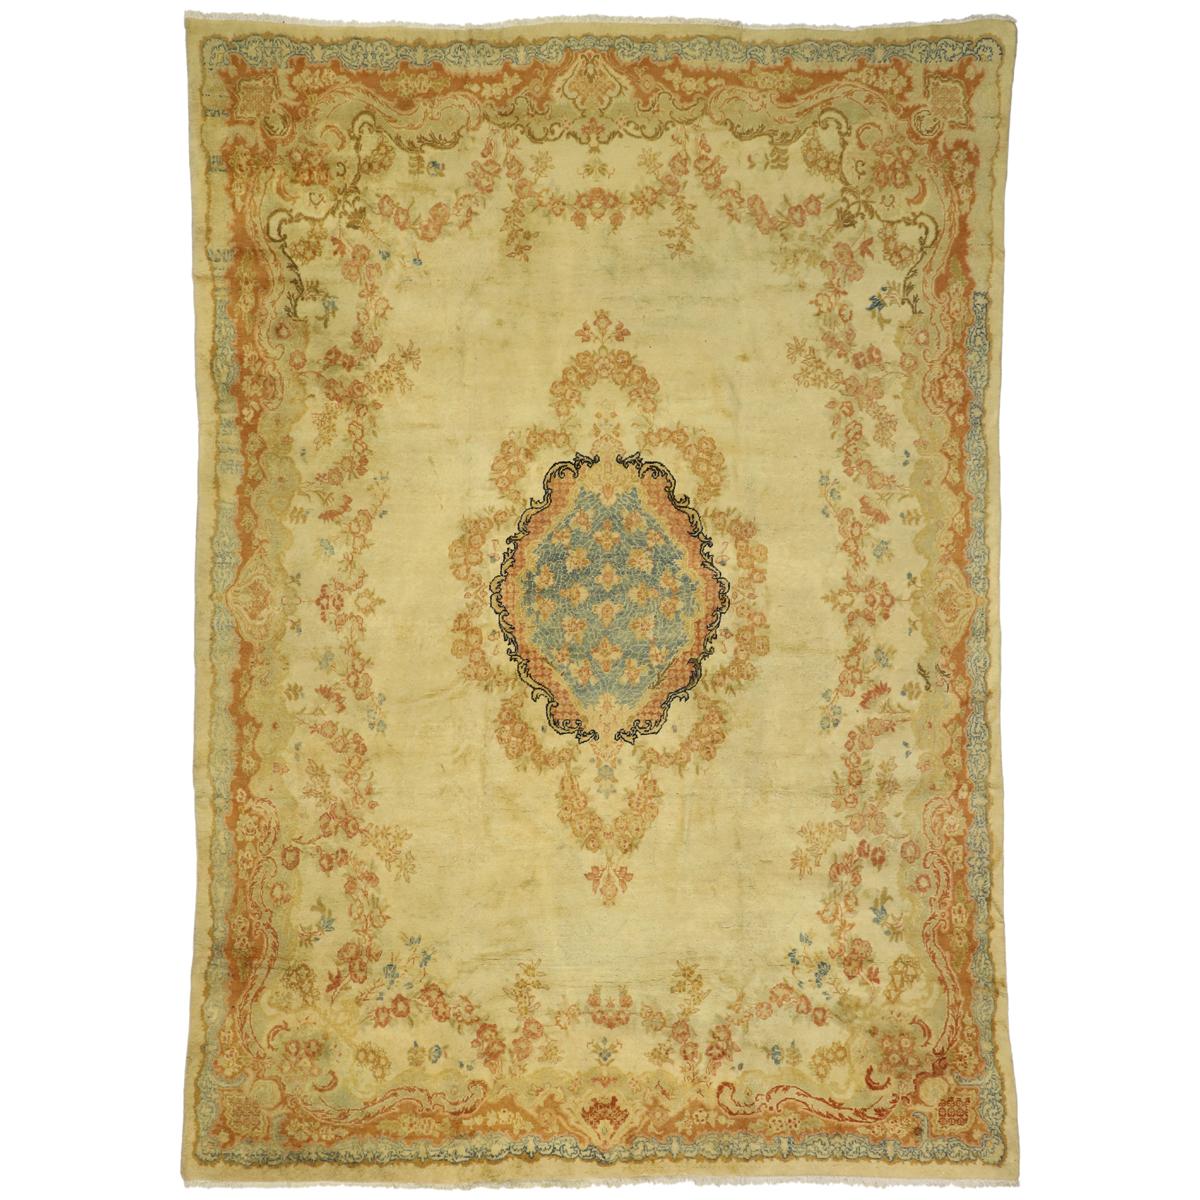 Antique Persian Mahal Area Rug with French Rococo and Louis XV Style